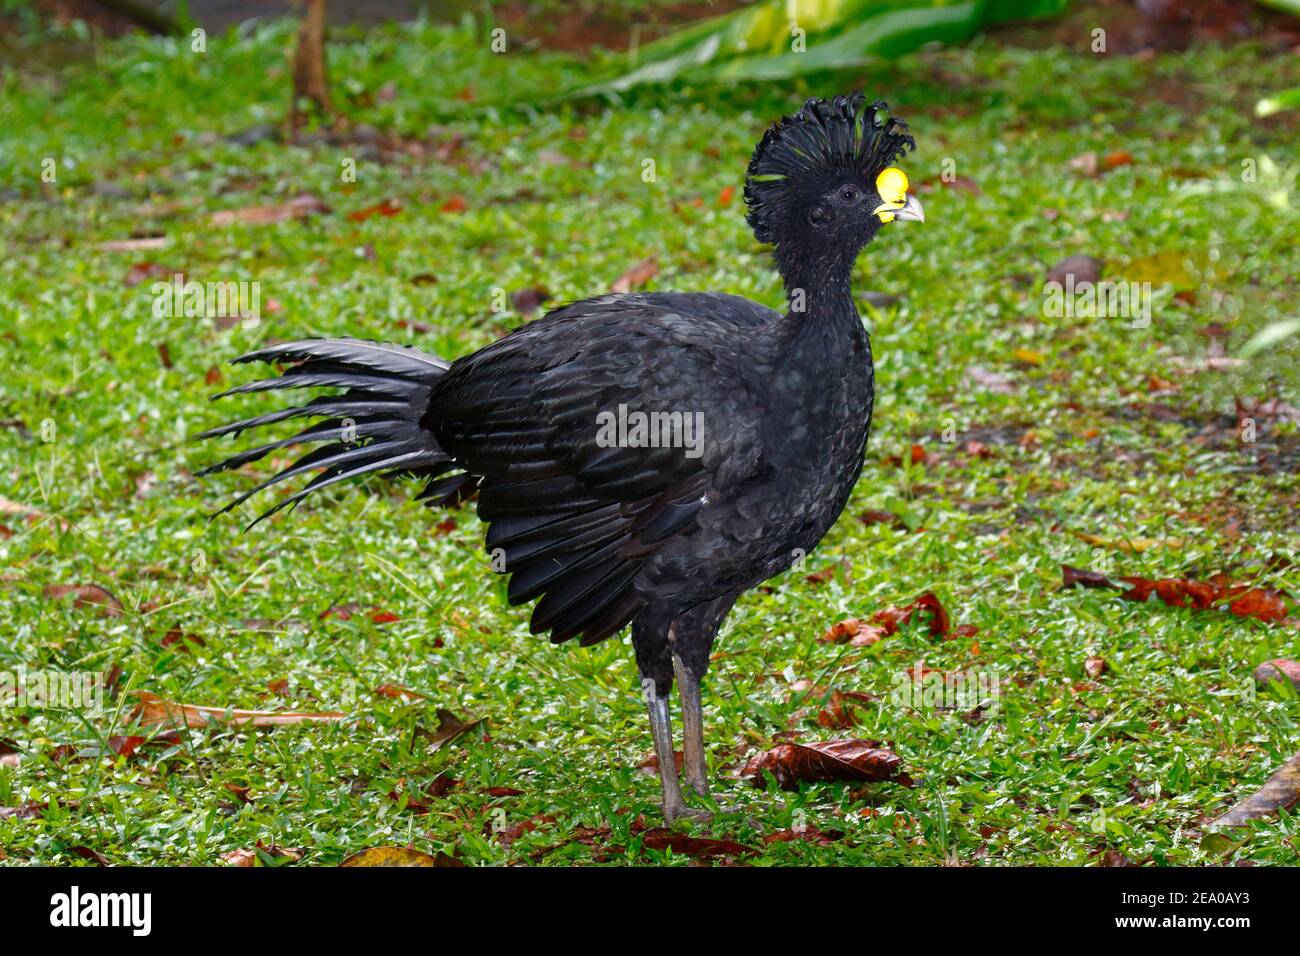 A male great curassow, Crax rubra, flares a crest while foraging on a turf. Stock Photo